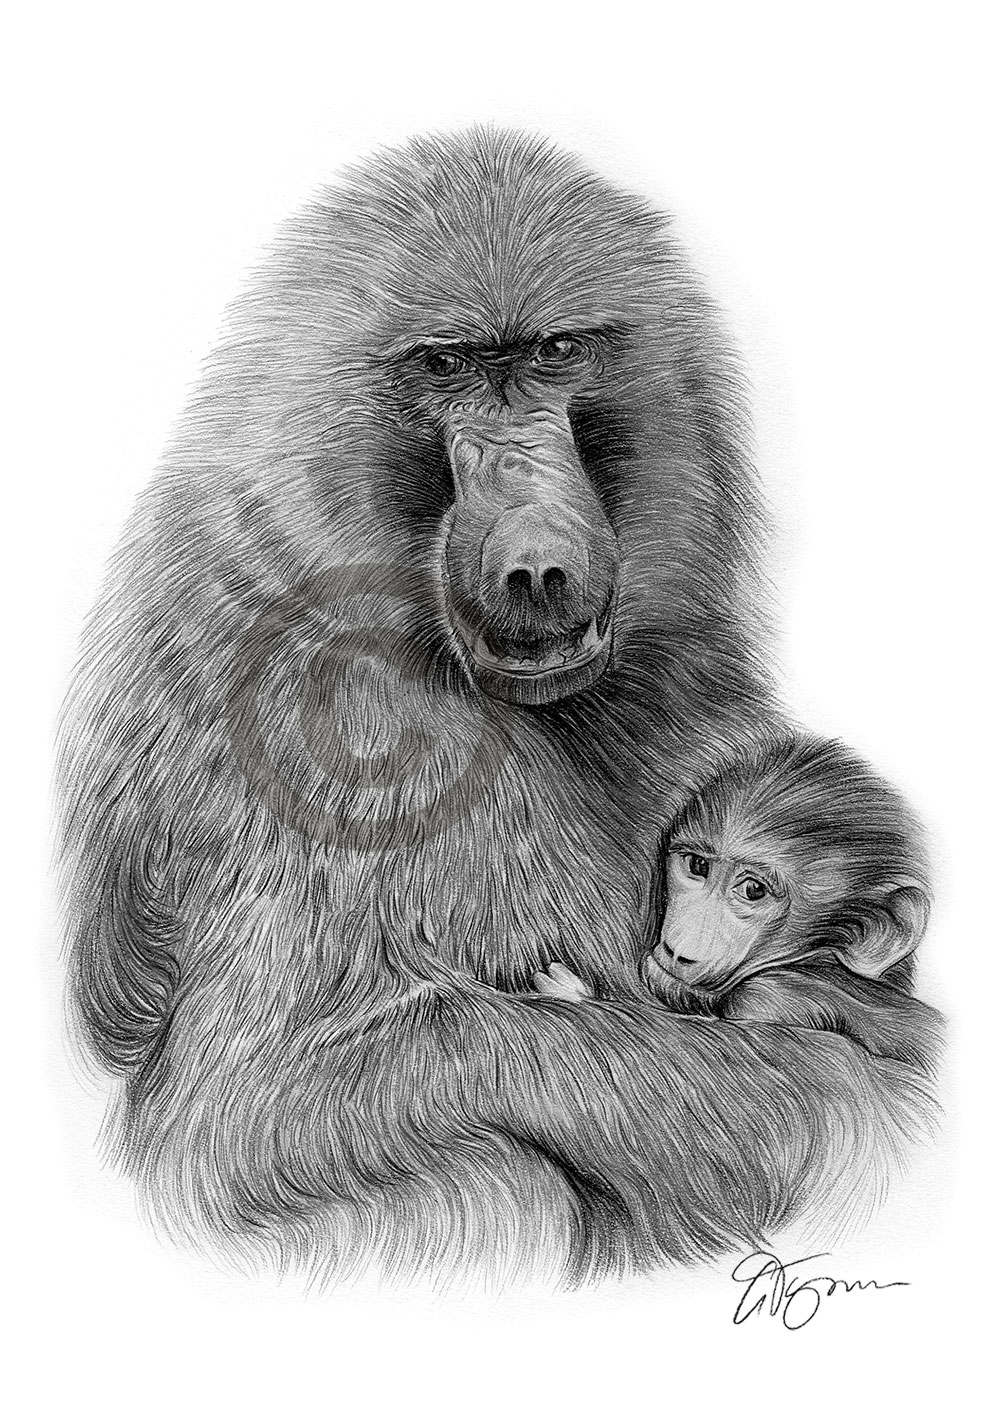 Pencil drawing of a baboon by artist Gary Tymon